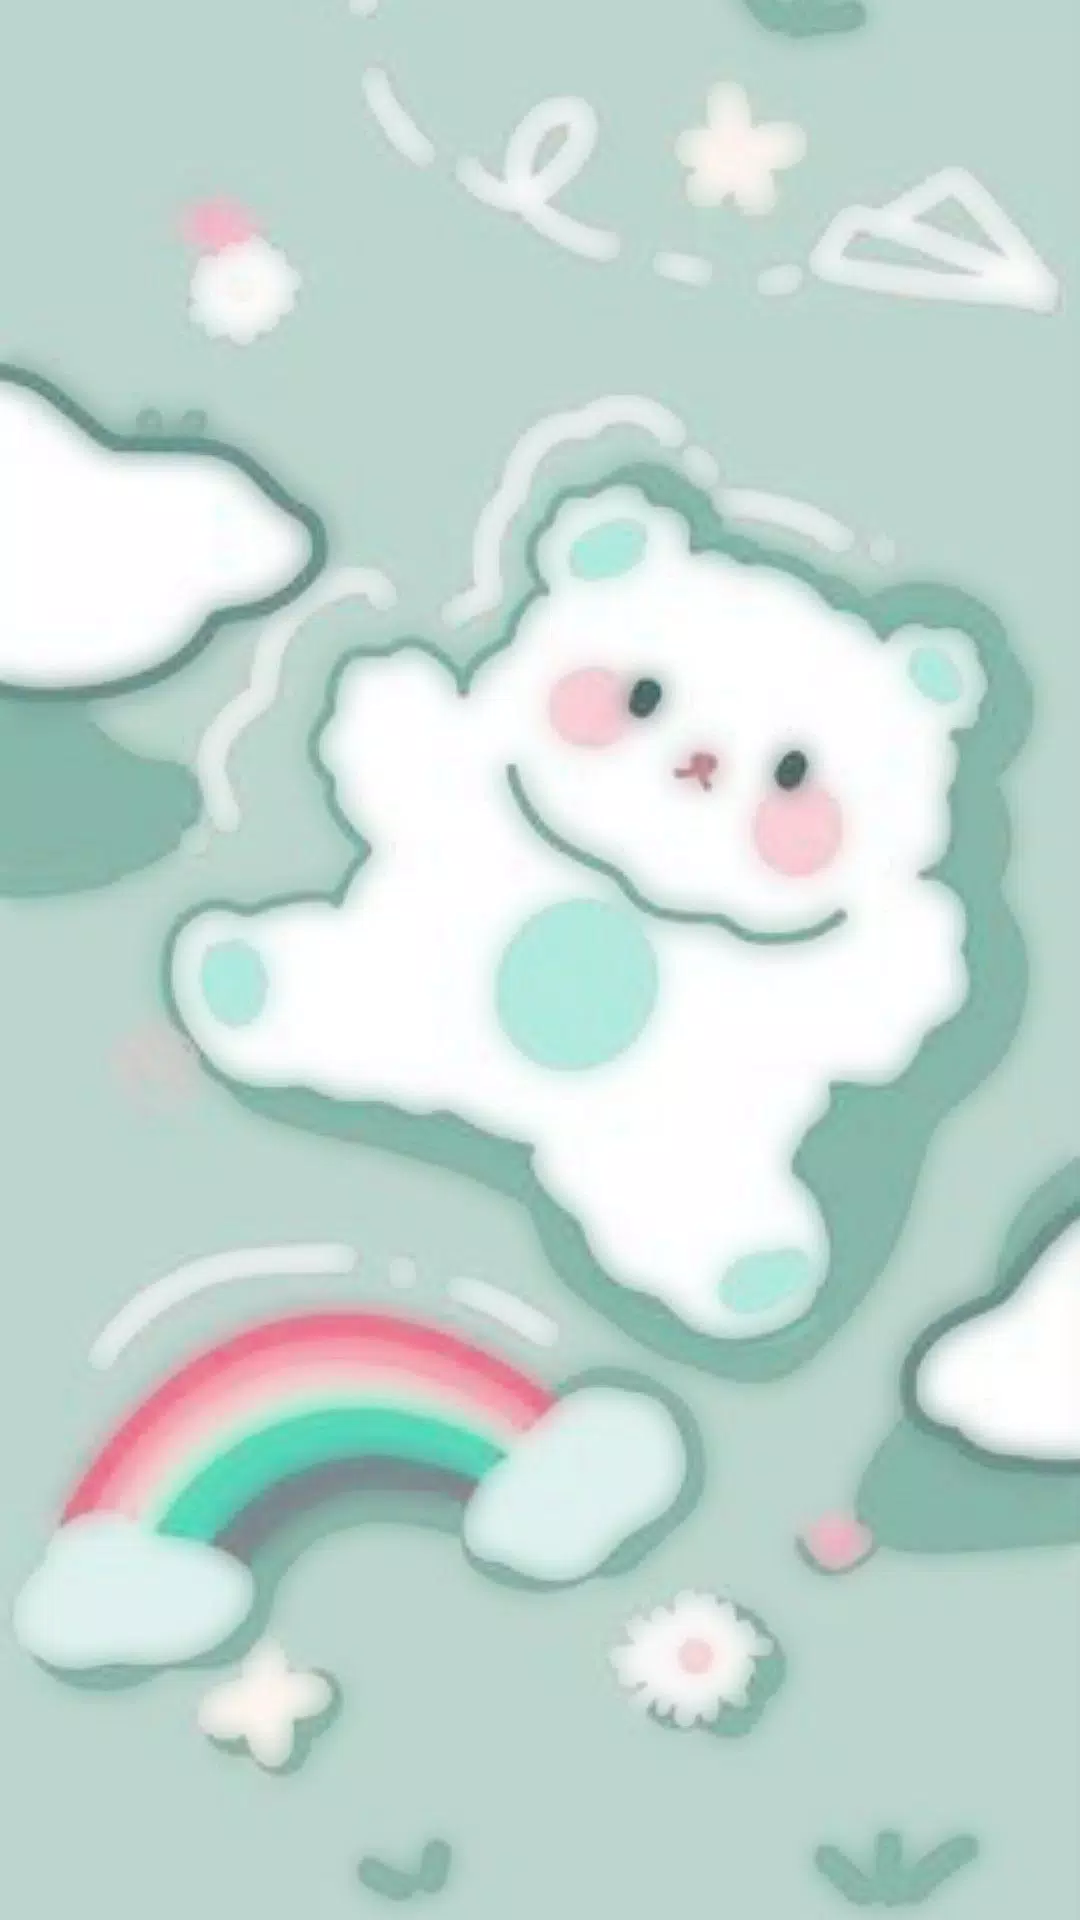 A white bear with blue spots and pink cheeks, standing on a cloud - Kawaii